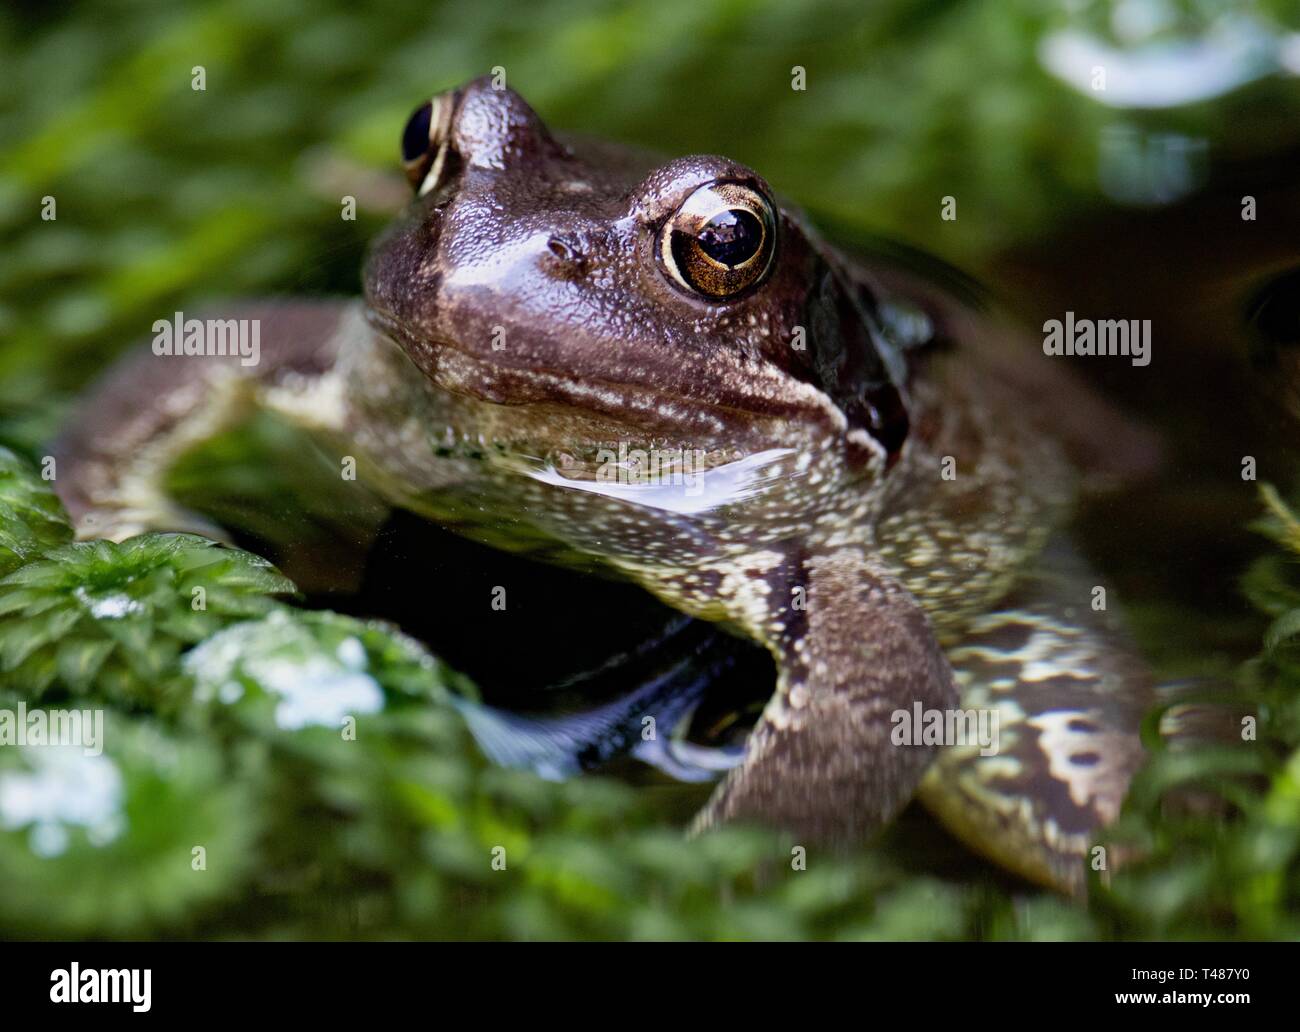 Frog in a pond Stock Photo